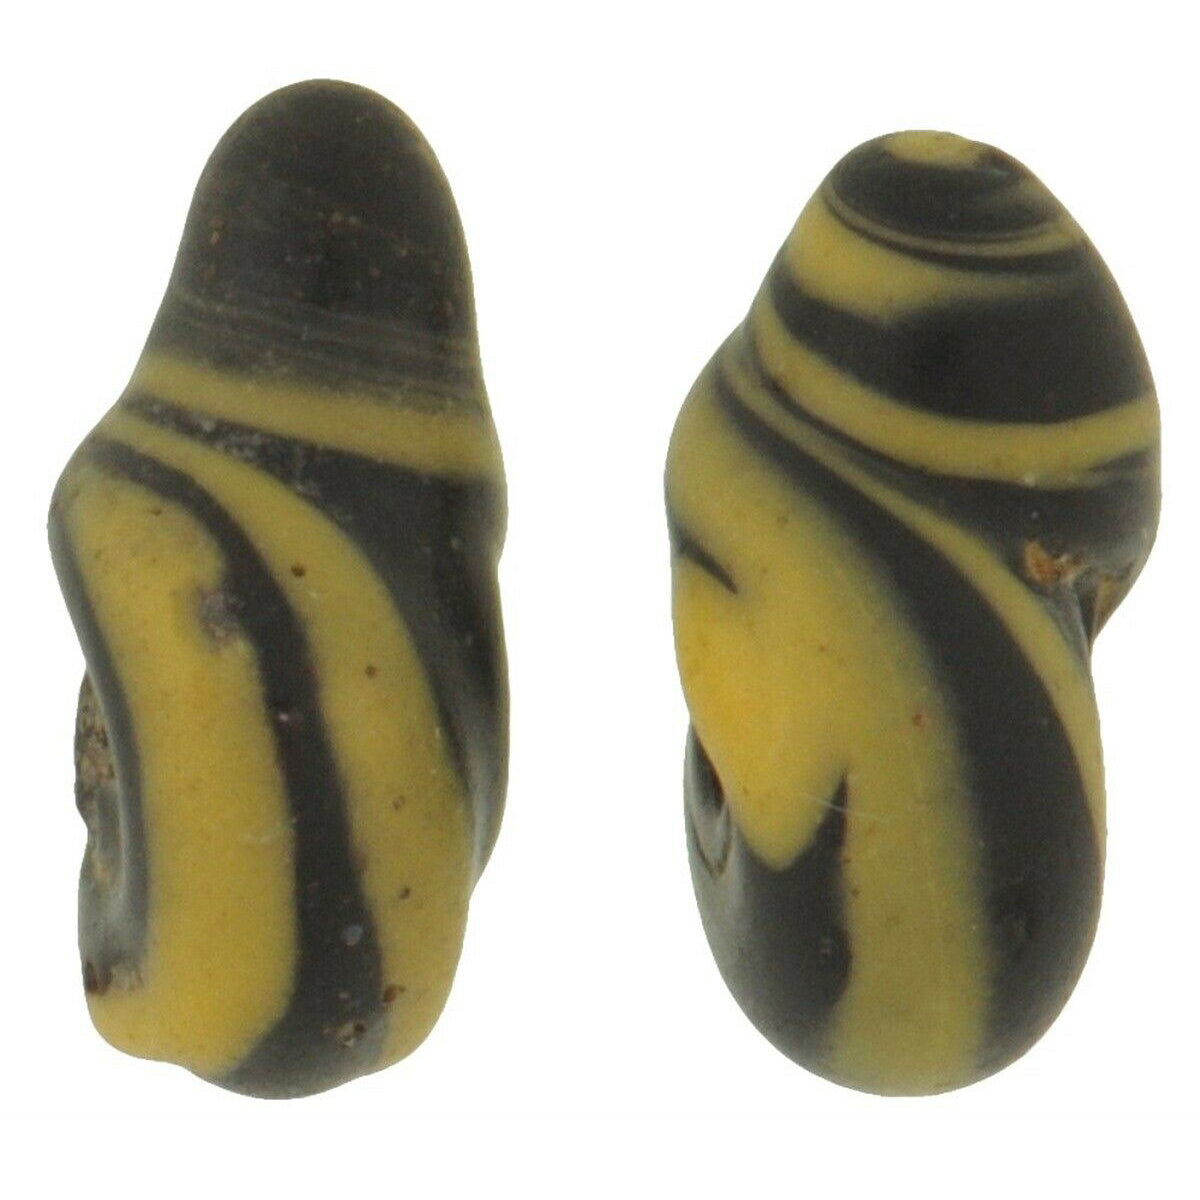 African trade beads Snail Fancy old Venetian glass beads lampwork pair rare - Tribalgh